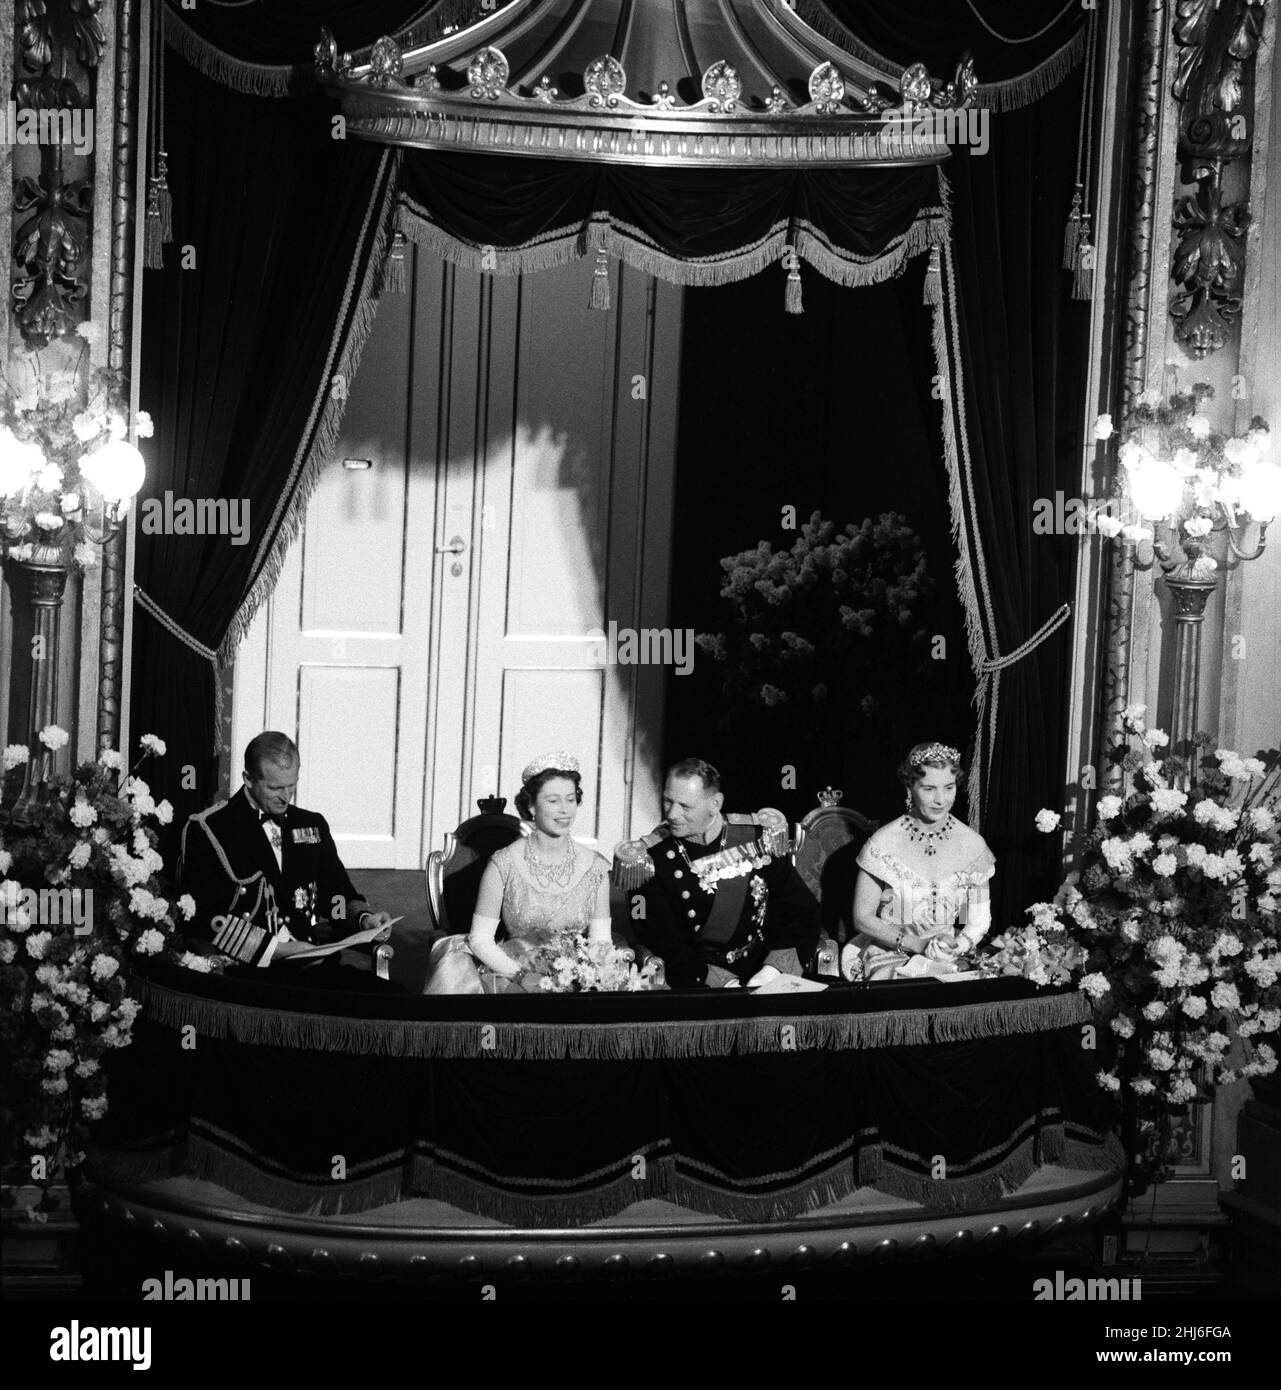 Queen Elizabeth II and Prince Philip, Duke of Edinburgh visit to Denmark. Pictured, Prince Philip, Queen Elizabeth II, King Frederik and Queen Ingrid of Denmark in their box at the gala performance in the Royal Theatre, Copenhagen. 23rd May 1957. Stock Photo